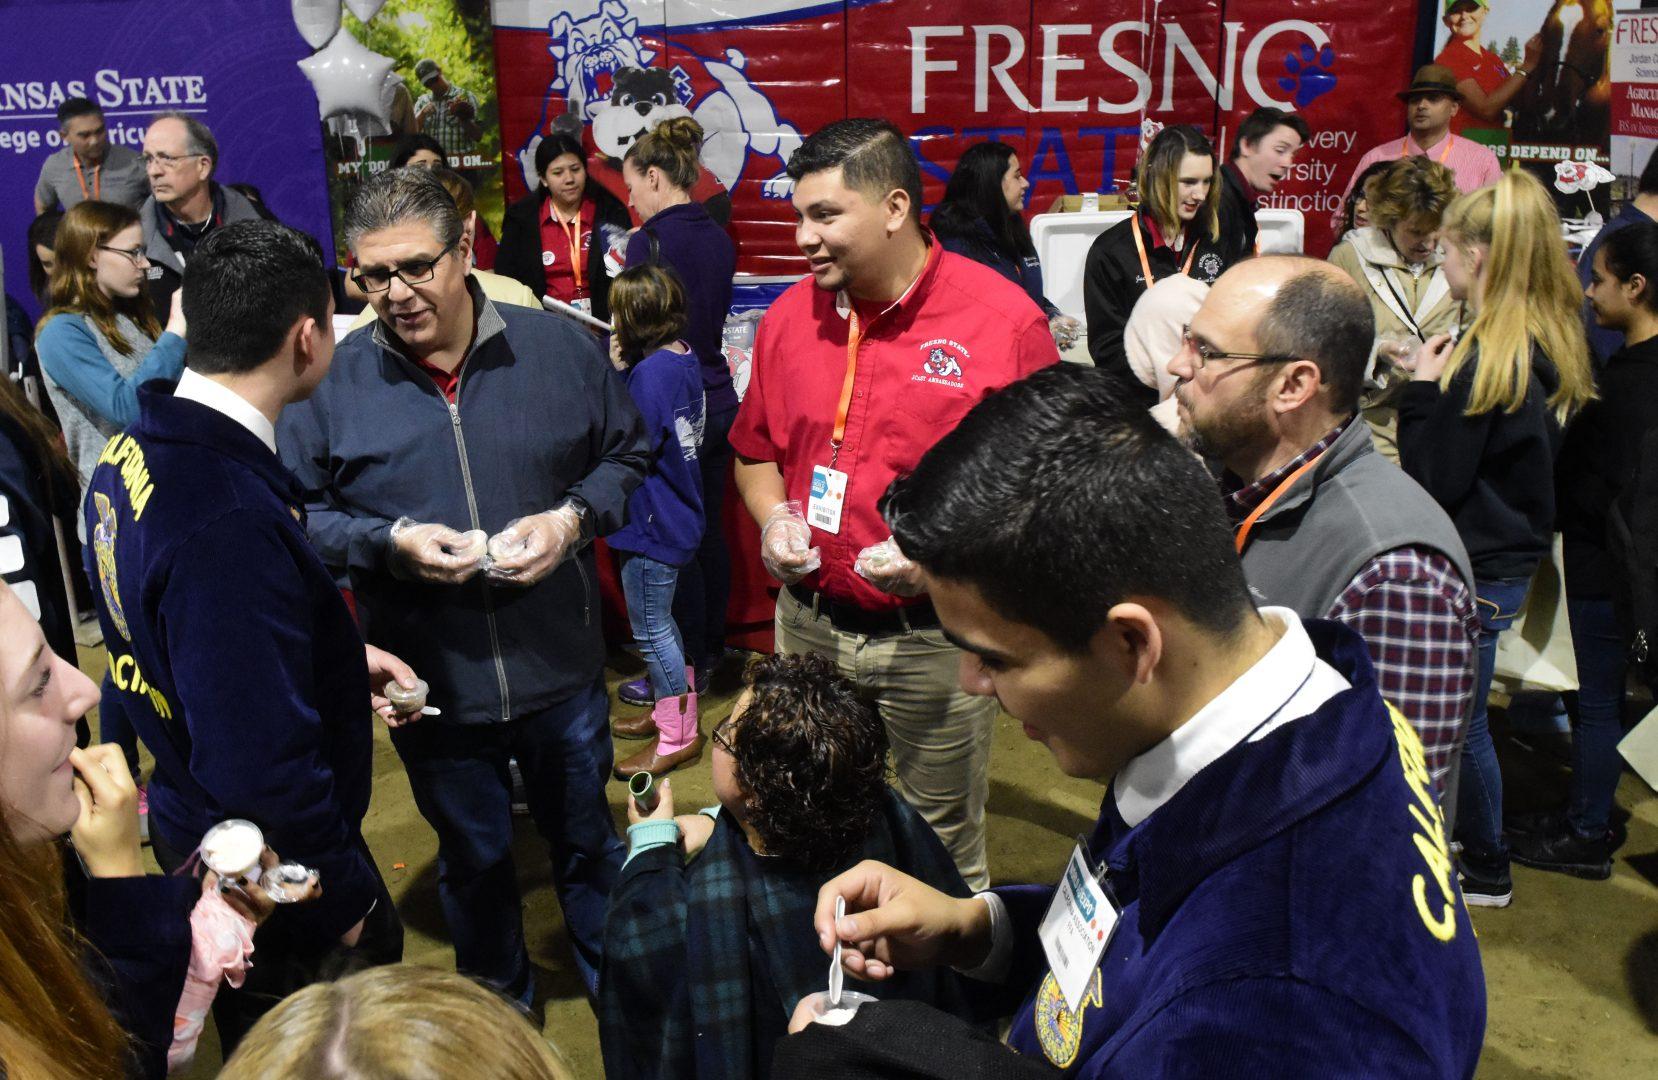 Fresno State president Dr. Joseph I. Castro and ag ambassador Omar Hernandez hand out Fresno State ice cream at the World Ag Expo in Tulare on Feb. 14, 2019. (Geoff Thurner/ Jordan College of Agricultural Sciences and Technology)